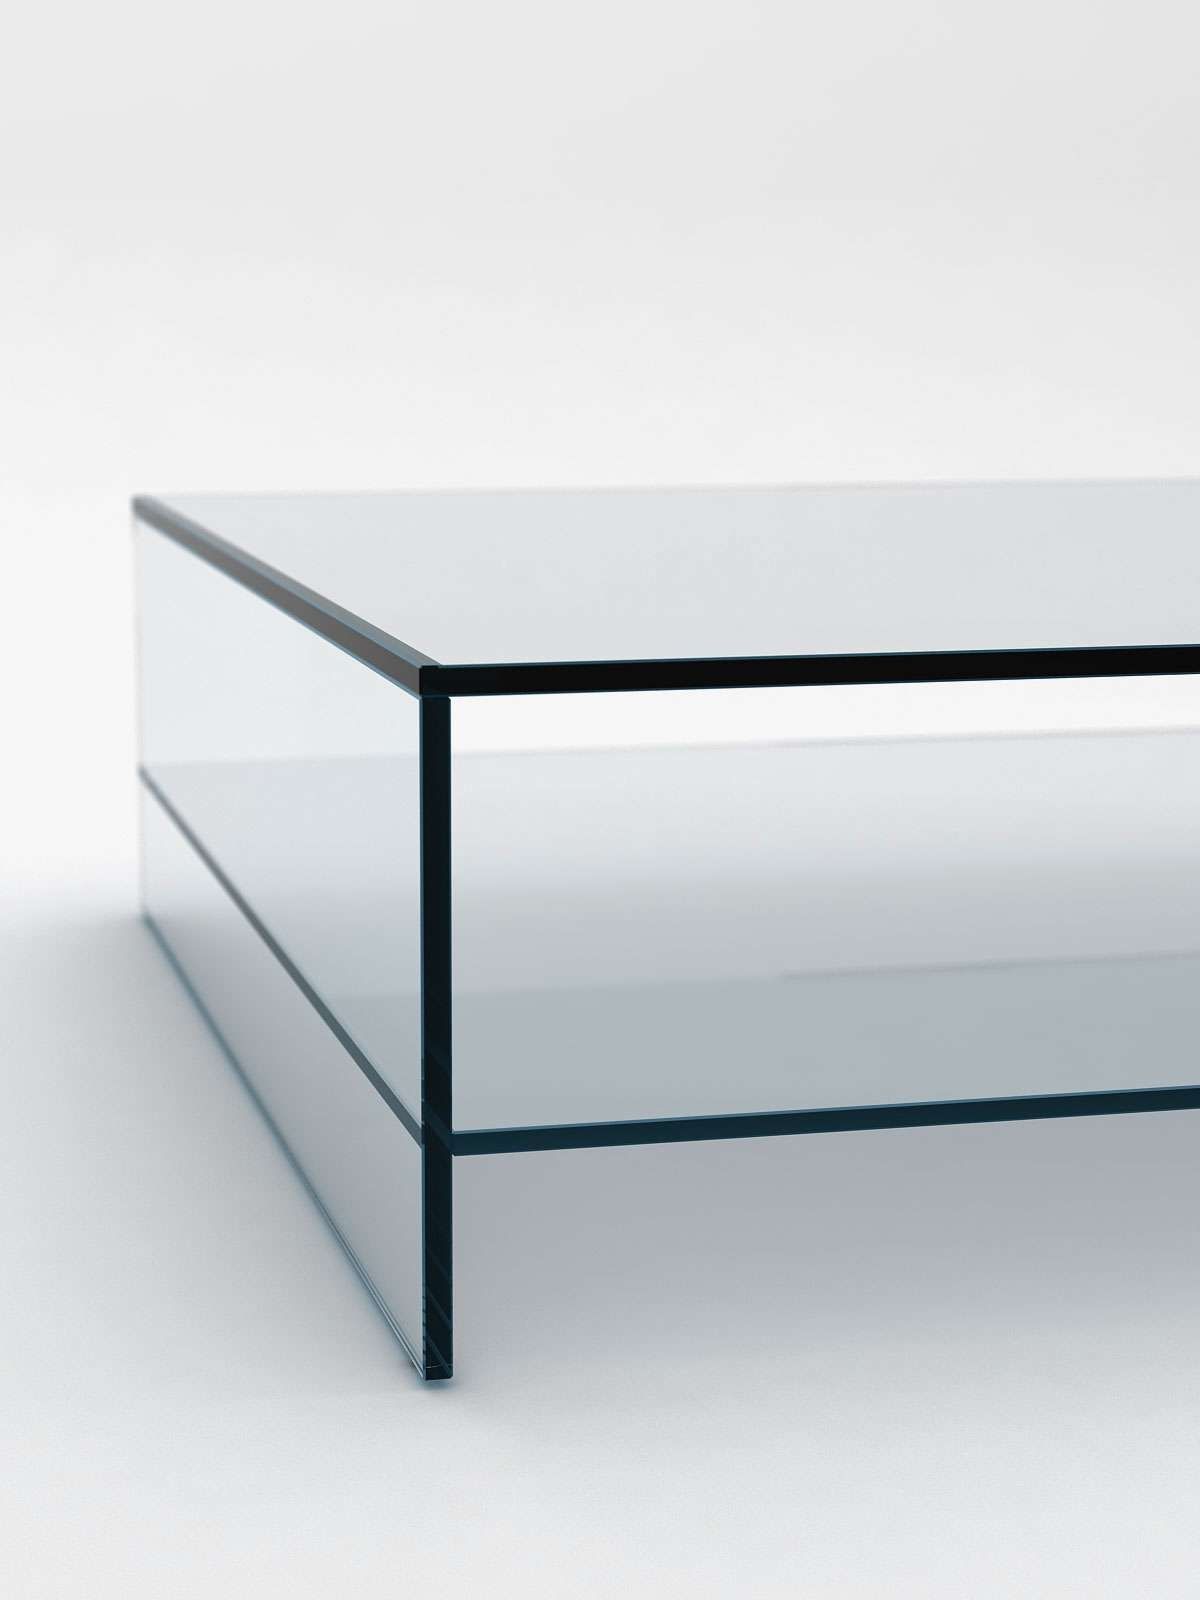 Most Current Curved Glass Coffee Tables Inside Coffee Table : Awesome Coffee Table With Drawers Coffee Table Legs (View 10 of 20)